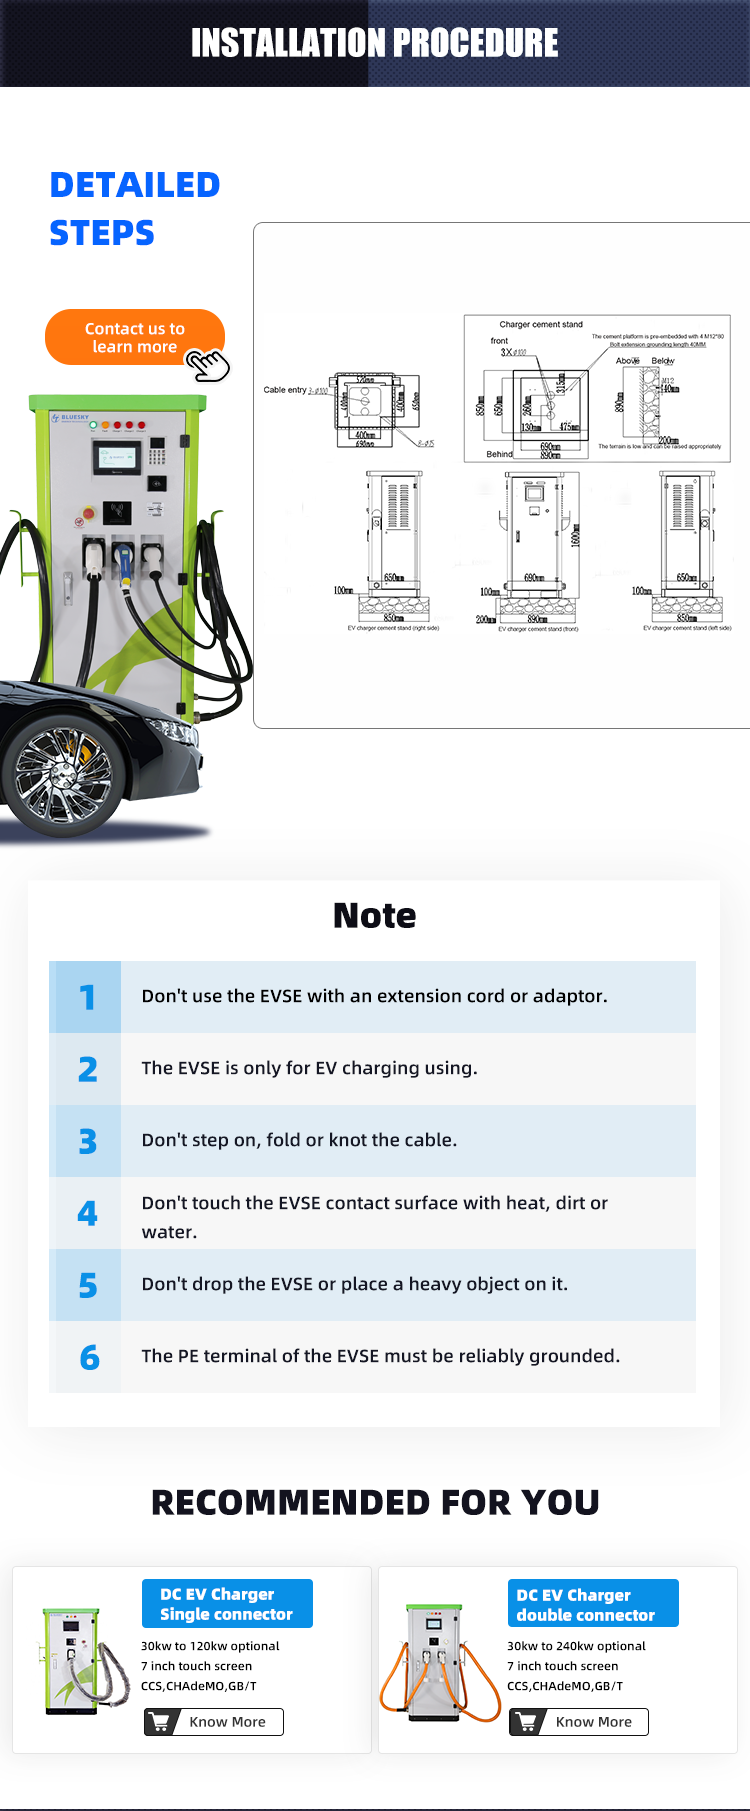 67kw AC/DC Integrated Commercial EV Charger GB/T+CCS2+Type2 Evse DC Fast EV Charger